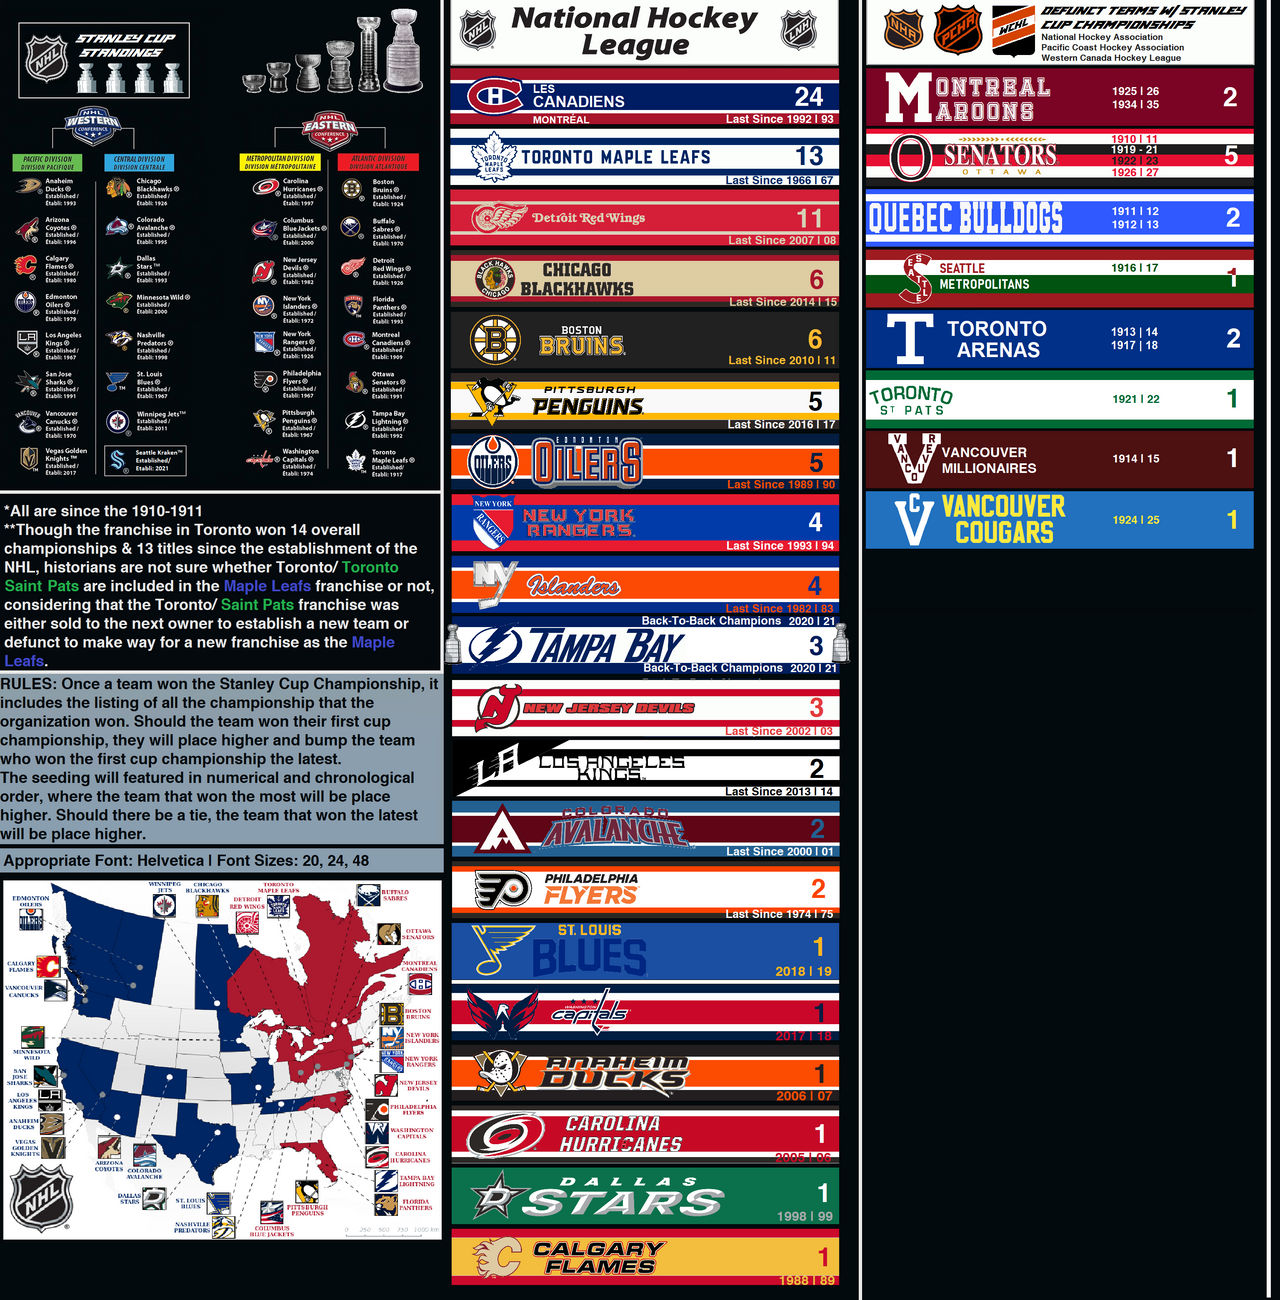 2018/19 NHL Standings by The-17th-Man on DeviantArt